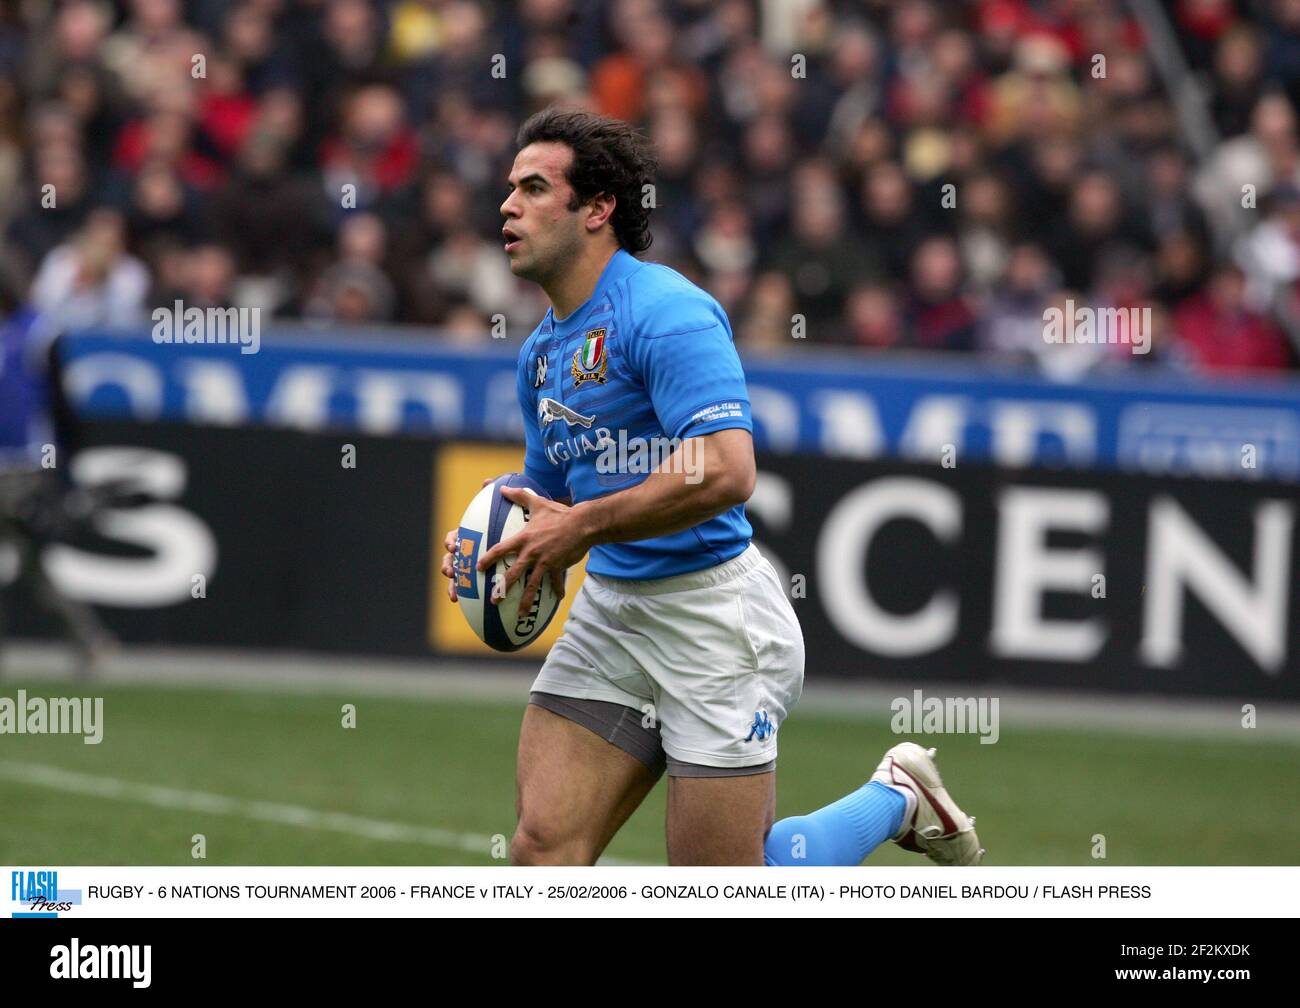 RUGBY - 6 NATIONS TOURNAMENT 2006 - FRANCE v ITALY - 25/02/2006 - GONZALO CANALE (ITA) - PHOTO DANIEL BARDOU / FLASH PRESS Stock Photo